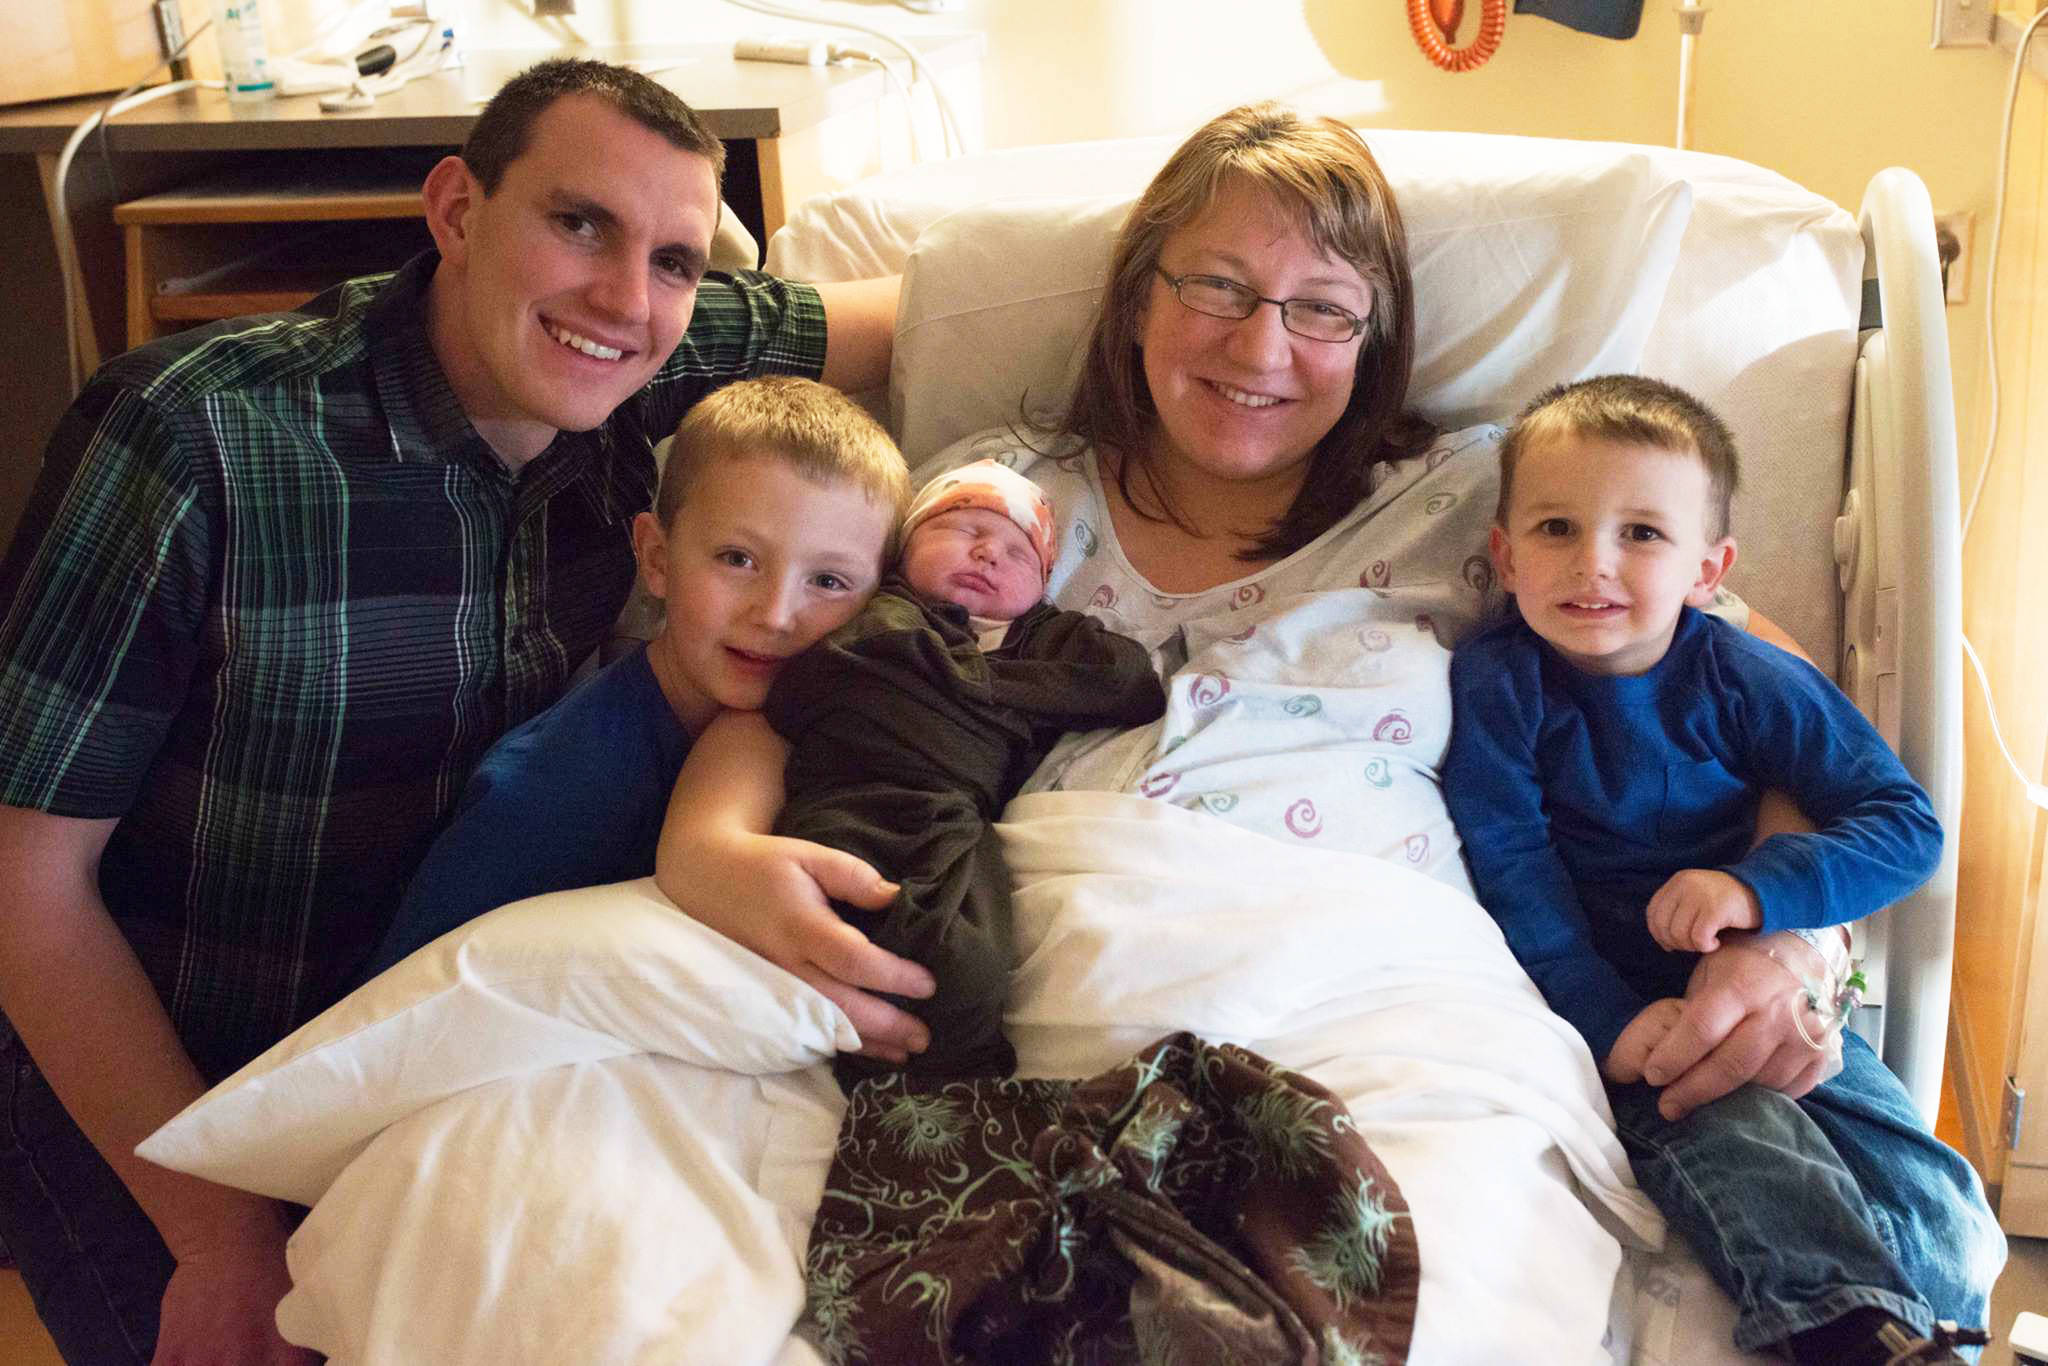 The Buzga family, from left to right: David, 5-year-old Blake, newborn Brooke, Jaimee, and 2-year-old Bradley, celebrate the addition to their family at South Peninsula Hospital. Brooke was the first baby born at the Hospital in the New Year, on Jan 4, 2018. (Photo by Katie Cannon)